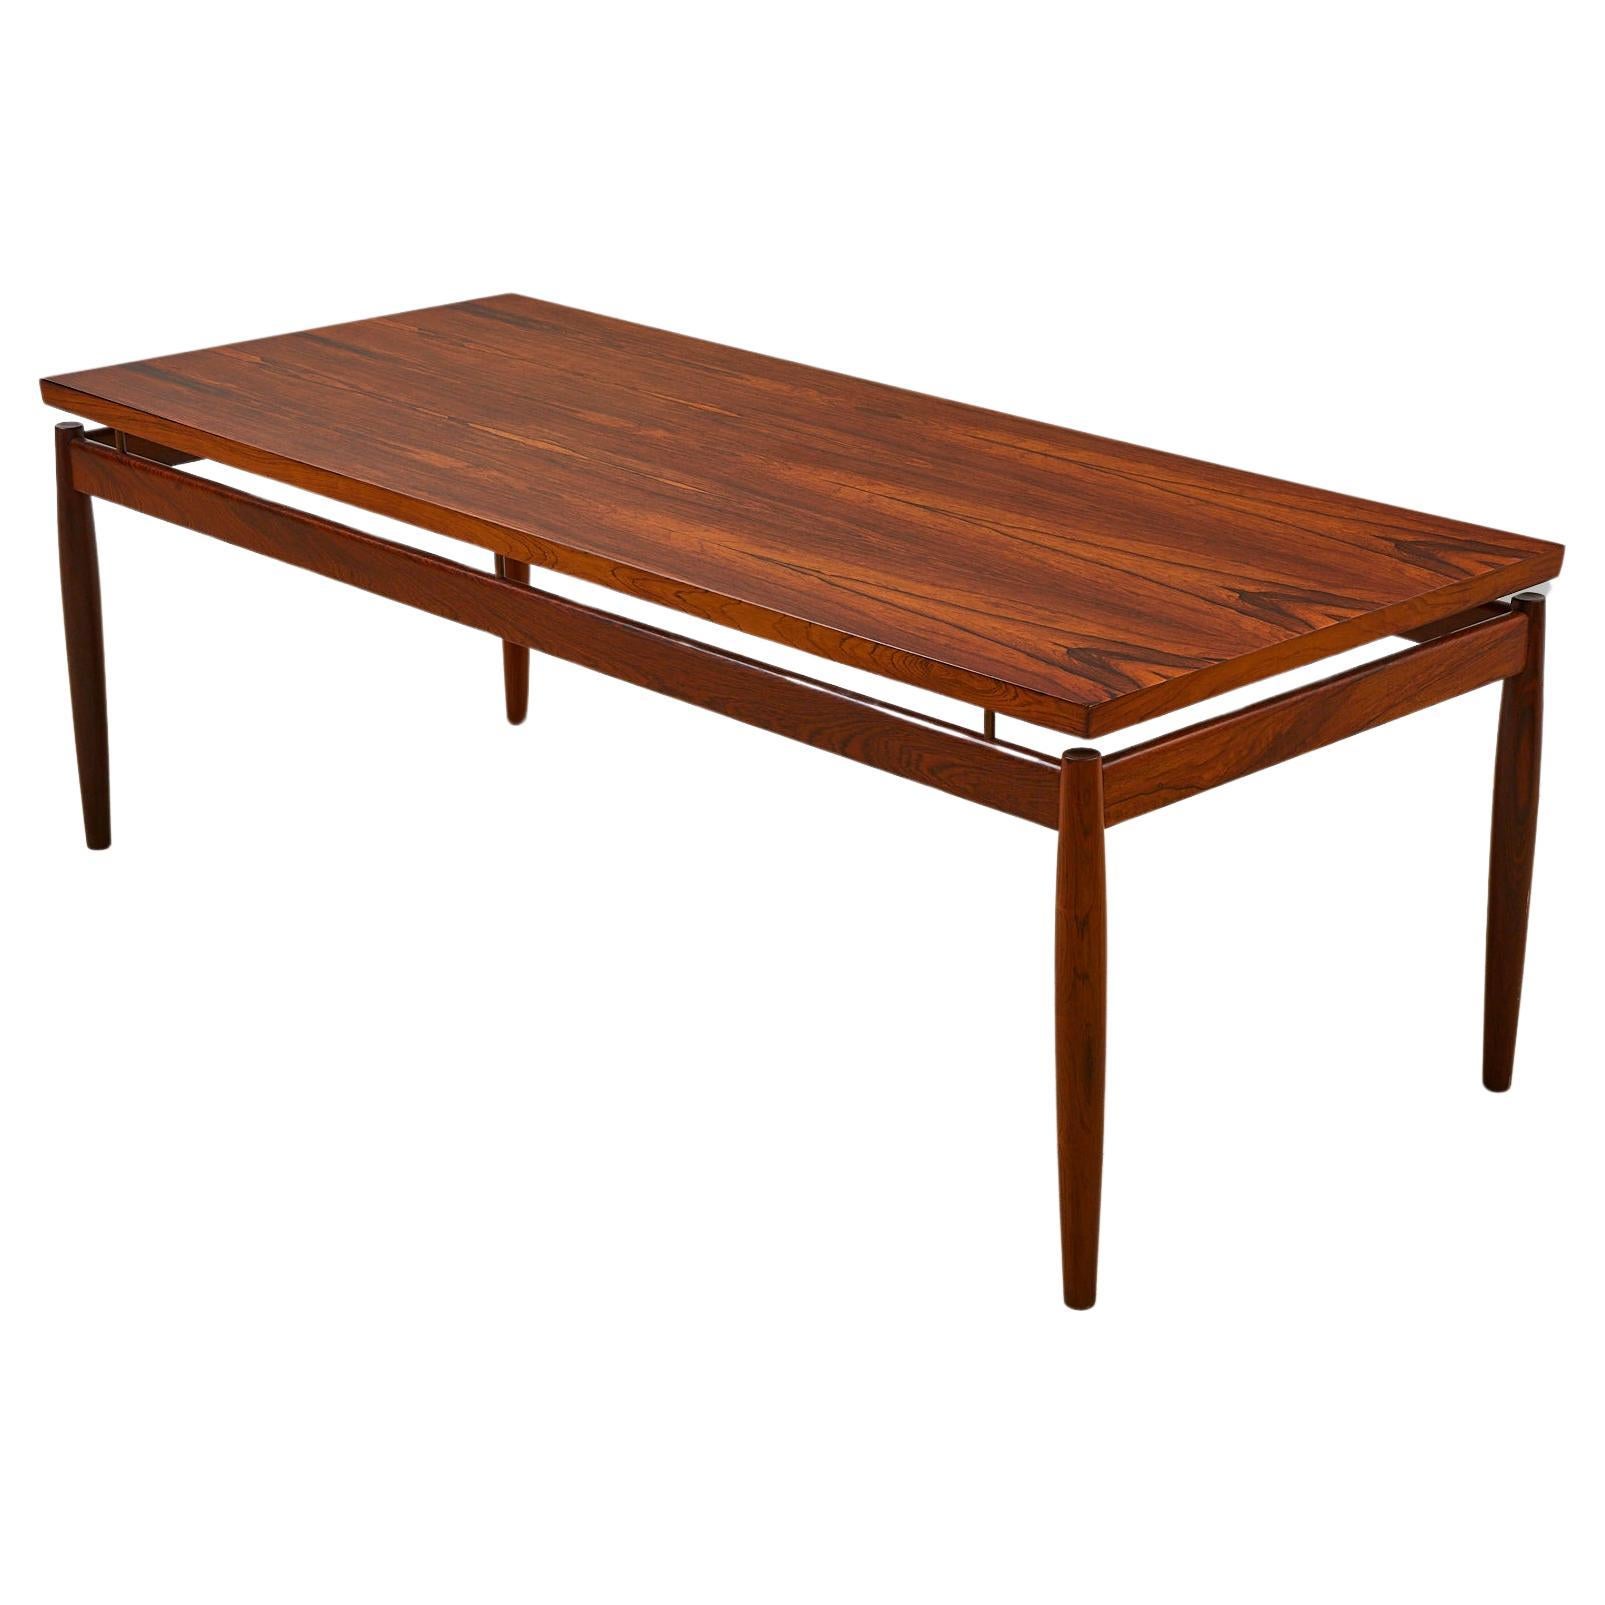 1960's Danish Rosewood Coffee Table, Grete Jalk For France & Son